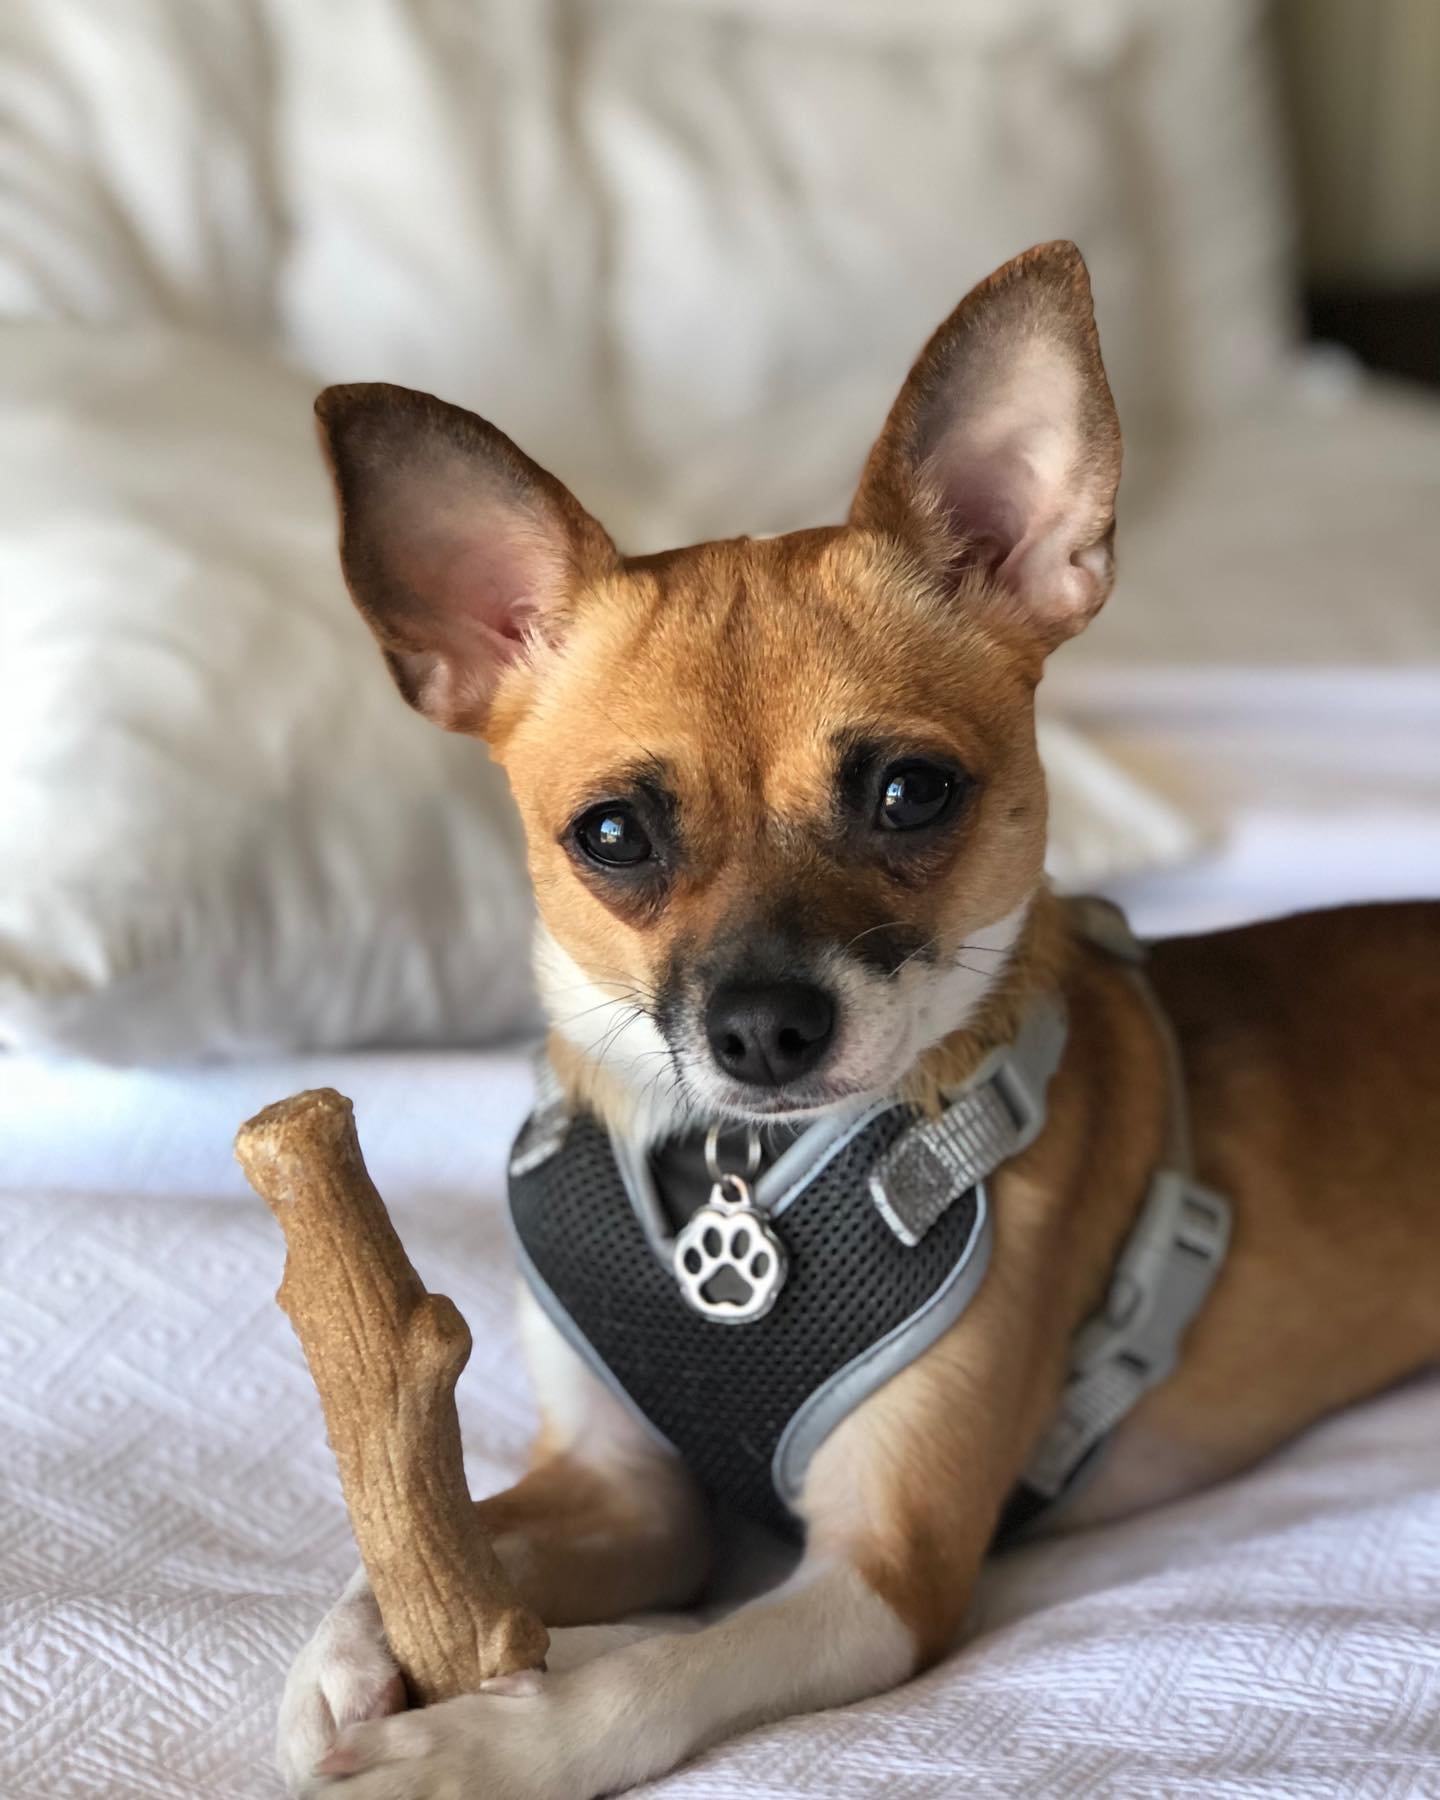 For National Chihuahua Day, I had to post some favorites of my photogenic beauty. She does it without even trying. What a girl. What a chihuahua. I am definitely won. 🥰🐾

#lovechihuahuas #chihuahualove #chihuahua #chihuahuas #chihuahualife #doggos 